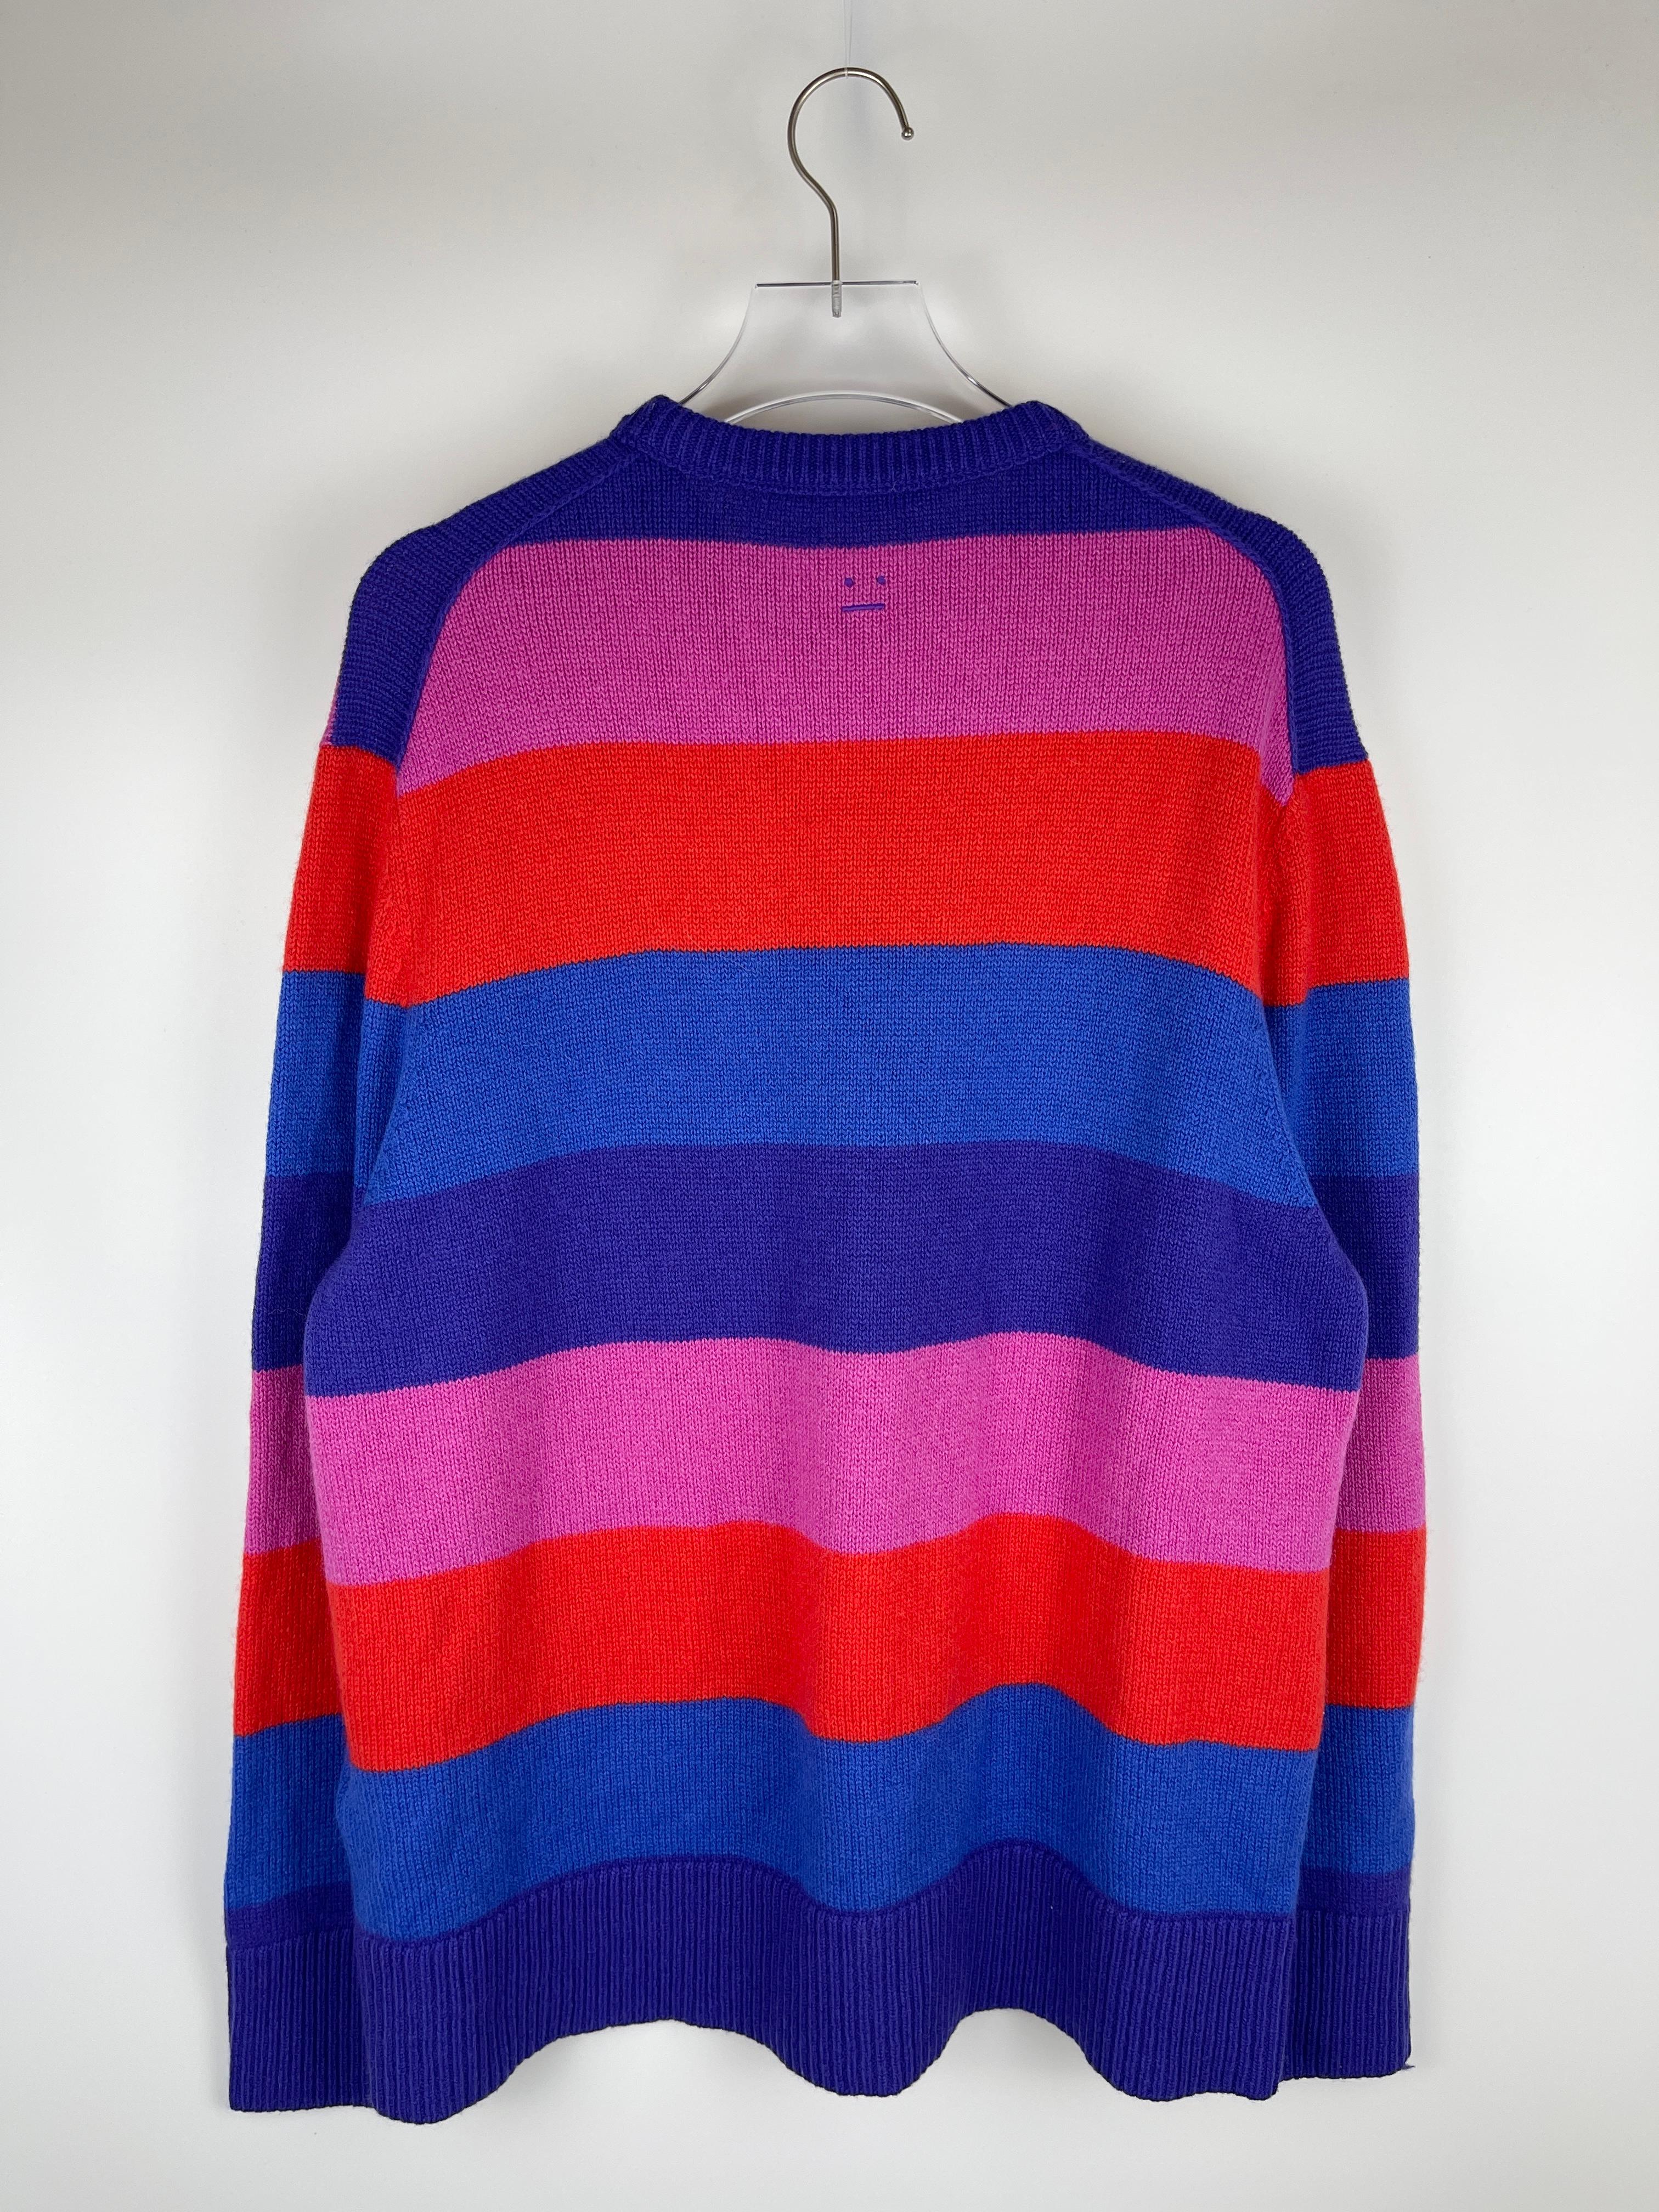 Acne Studios Multicolor Striped Sweater In Excellent Condition For Sale In Tương Mai Ward, Hoang Mai District